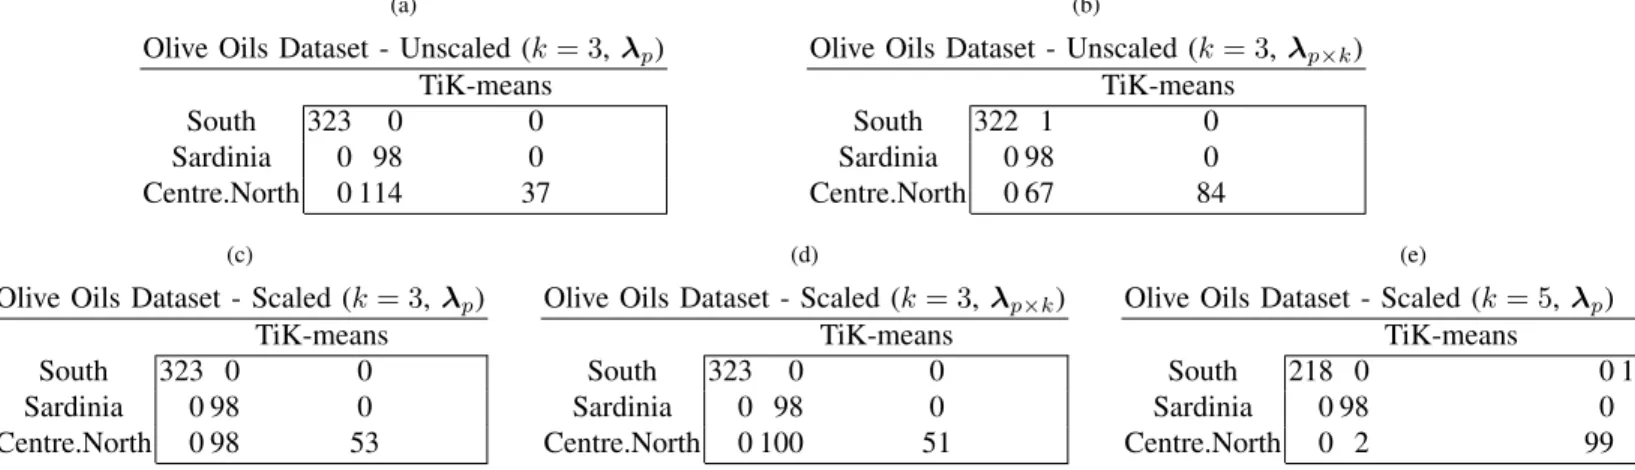 TABLE S-4: Confusion matrix for Iris dataset when clustered using TiK-means with (a) p-dimensional λ and (b) k × p- p-dimensional λ